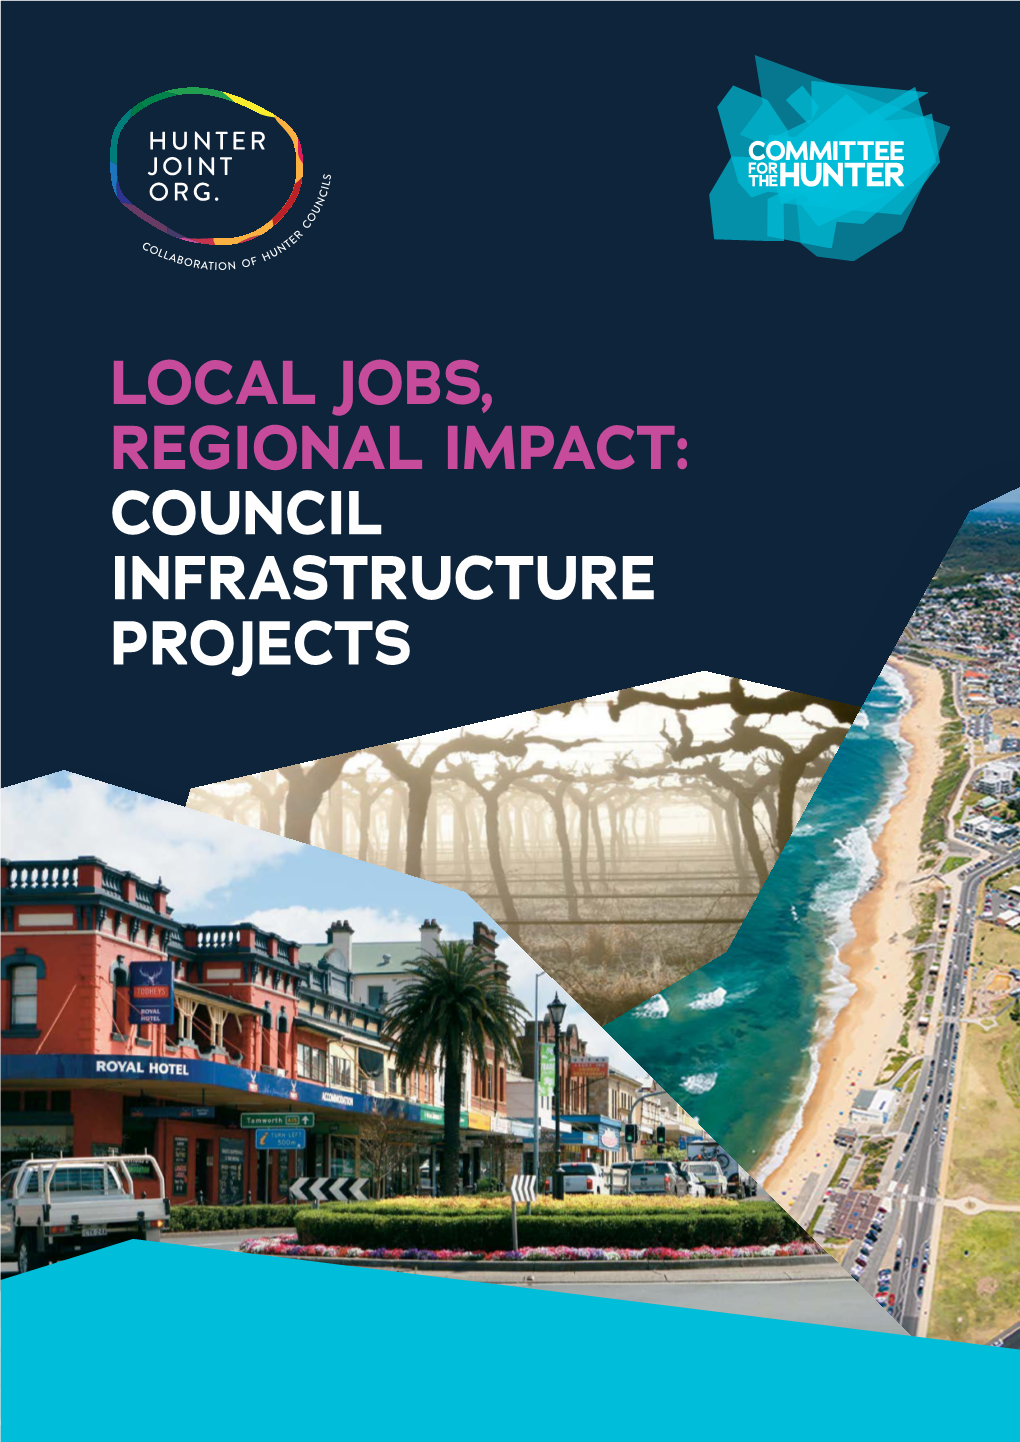 Council Infrastructure Projects